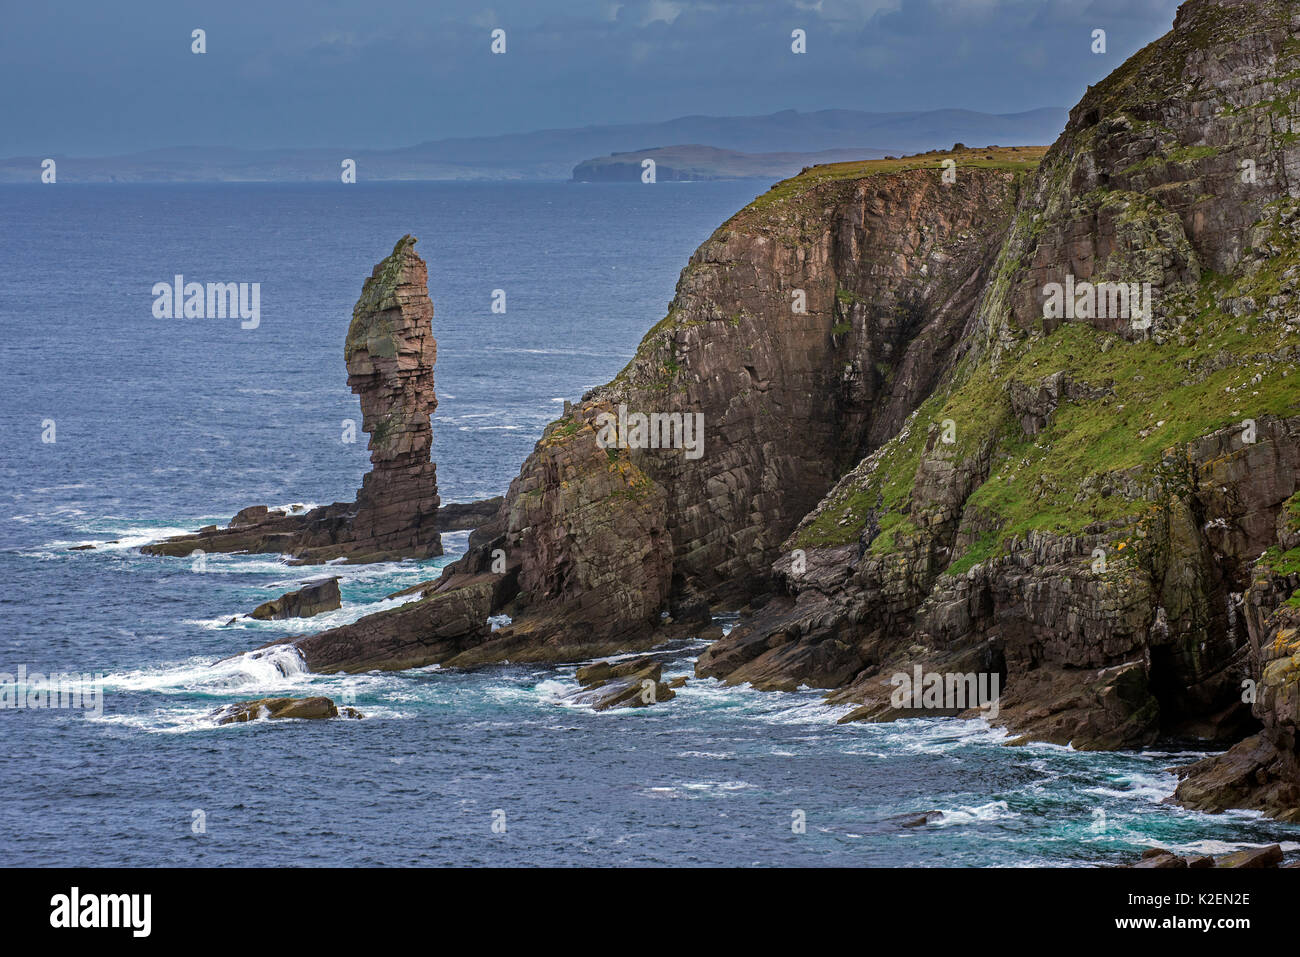 Old Man of Stoer, 60 metres high sea stack of Torridonian sandstone at the Point of Stoer in Sutherland, Scottish Highlands, Scotland, UK, September 2016 Stock Photo